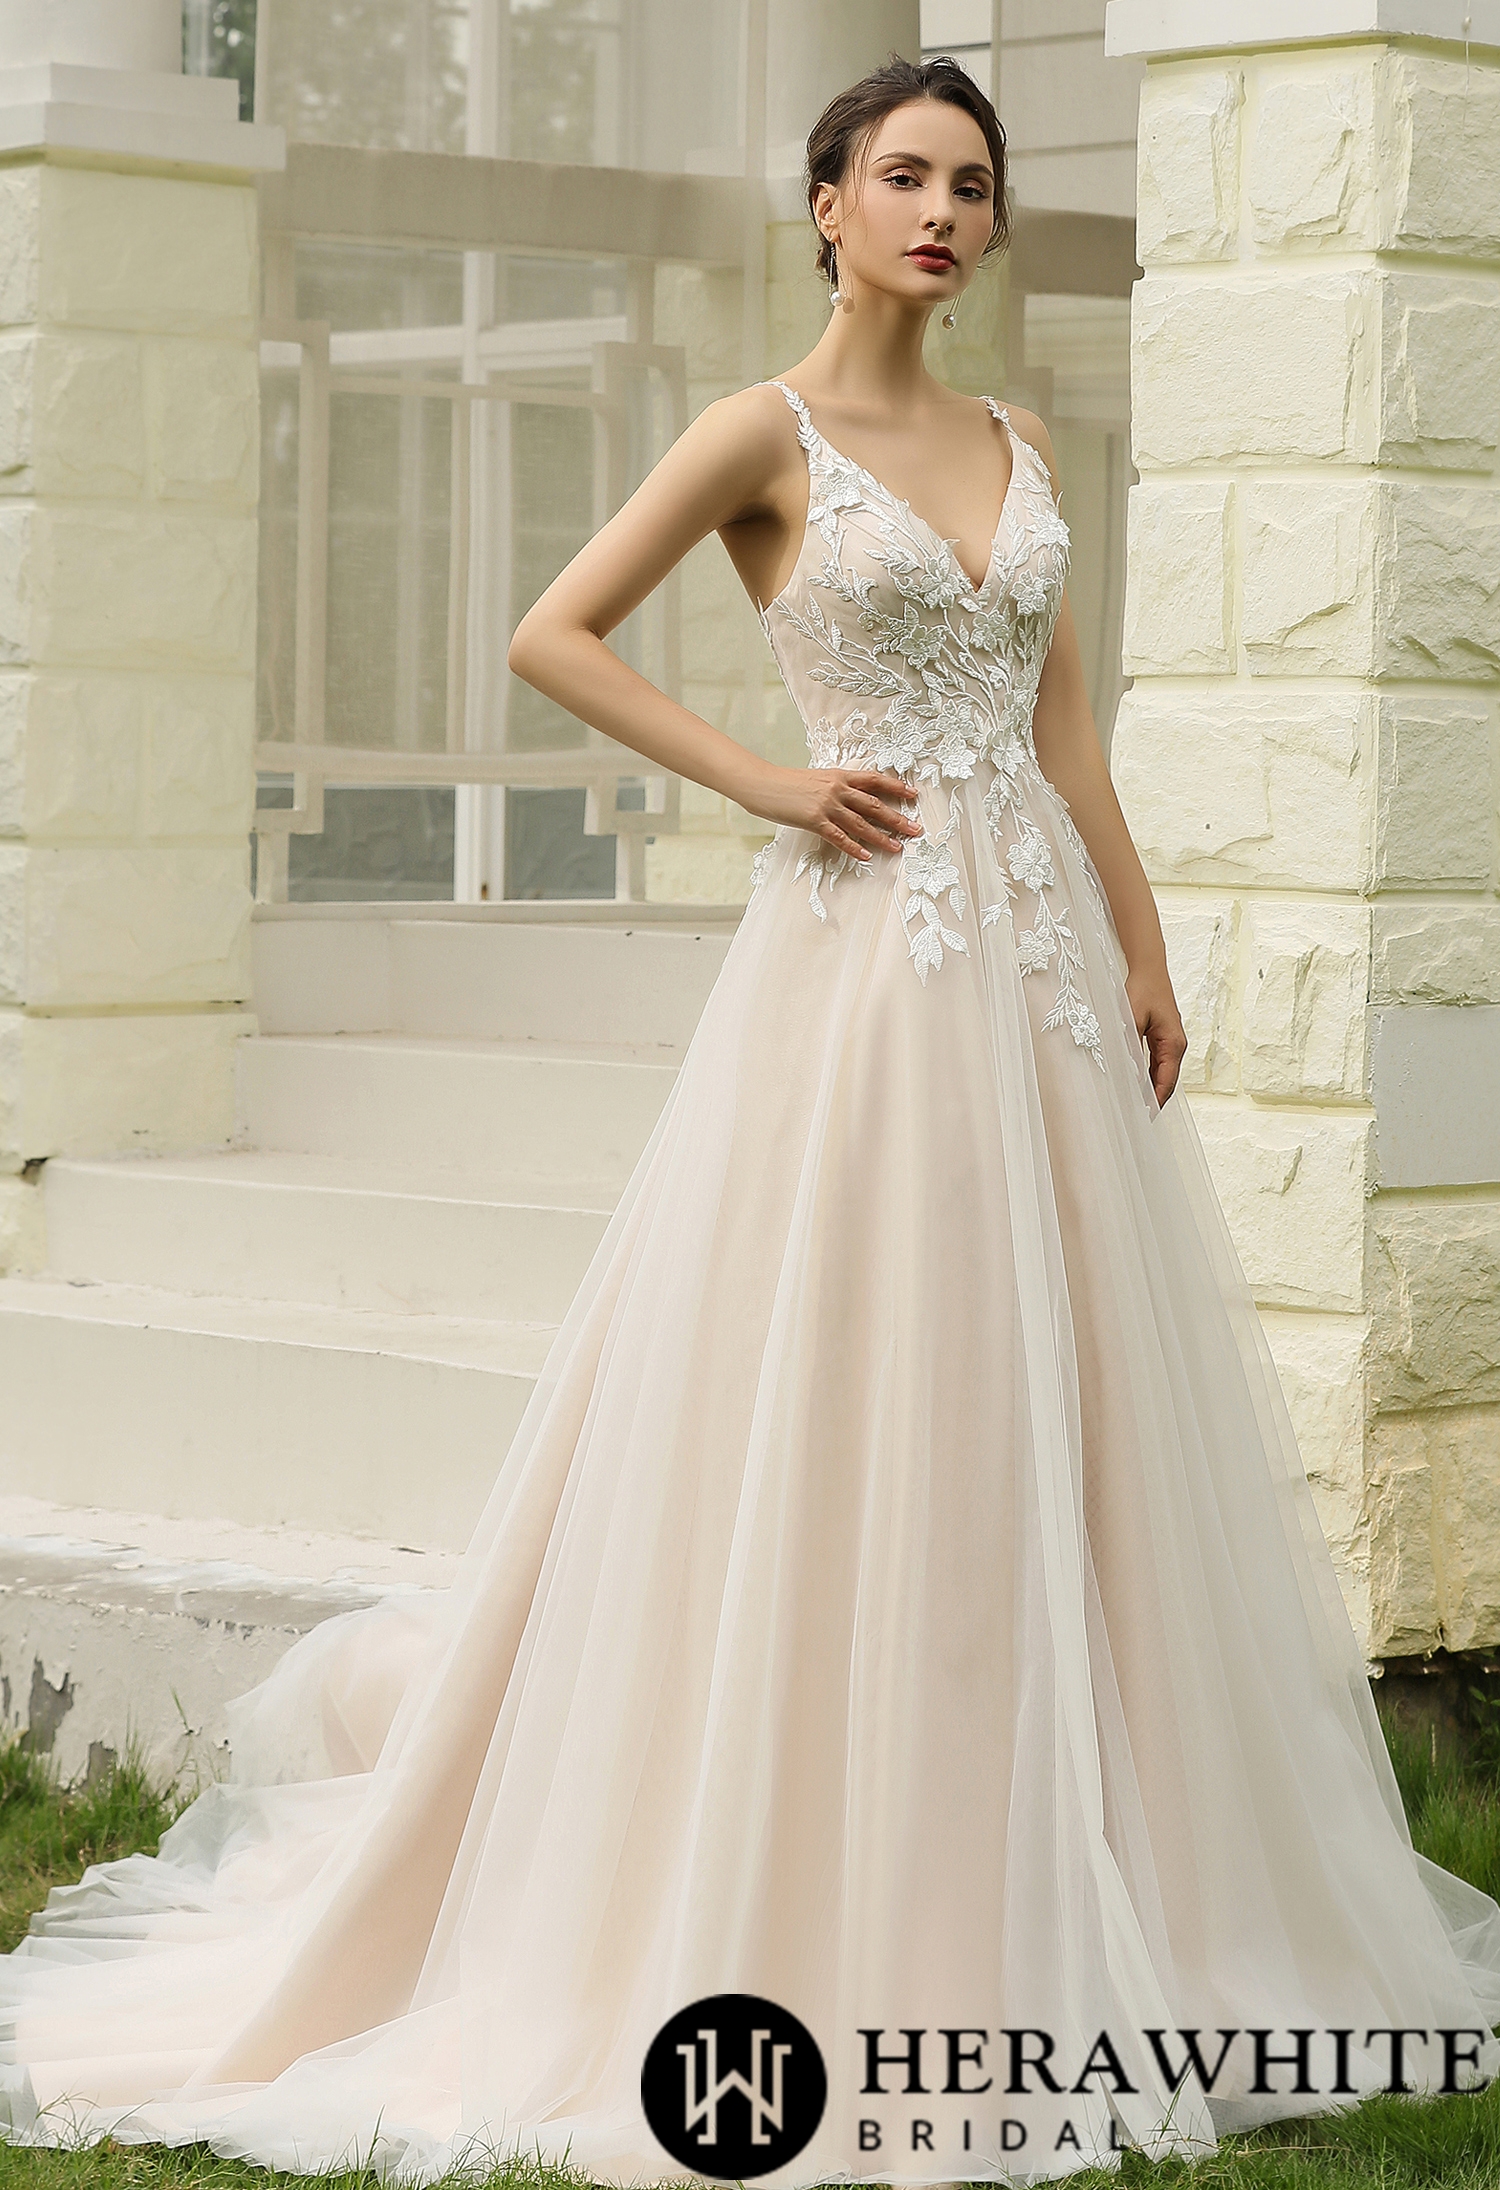 Ready To Ship|Princess Ballgown Wedding Dress with Floral Lace Straps